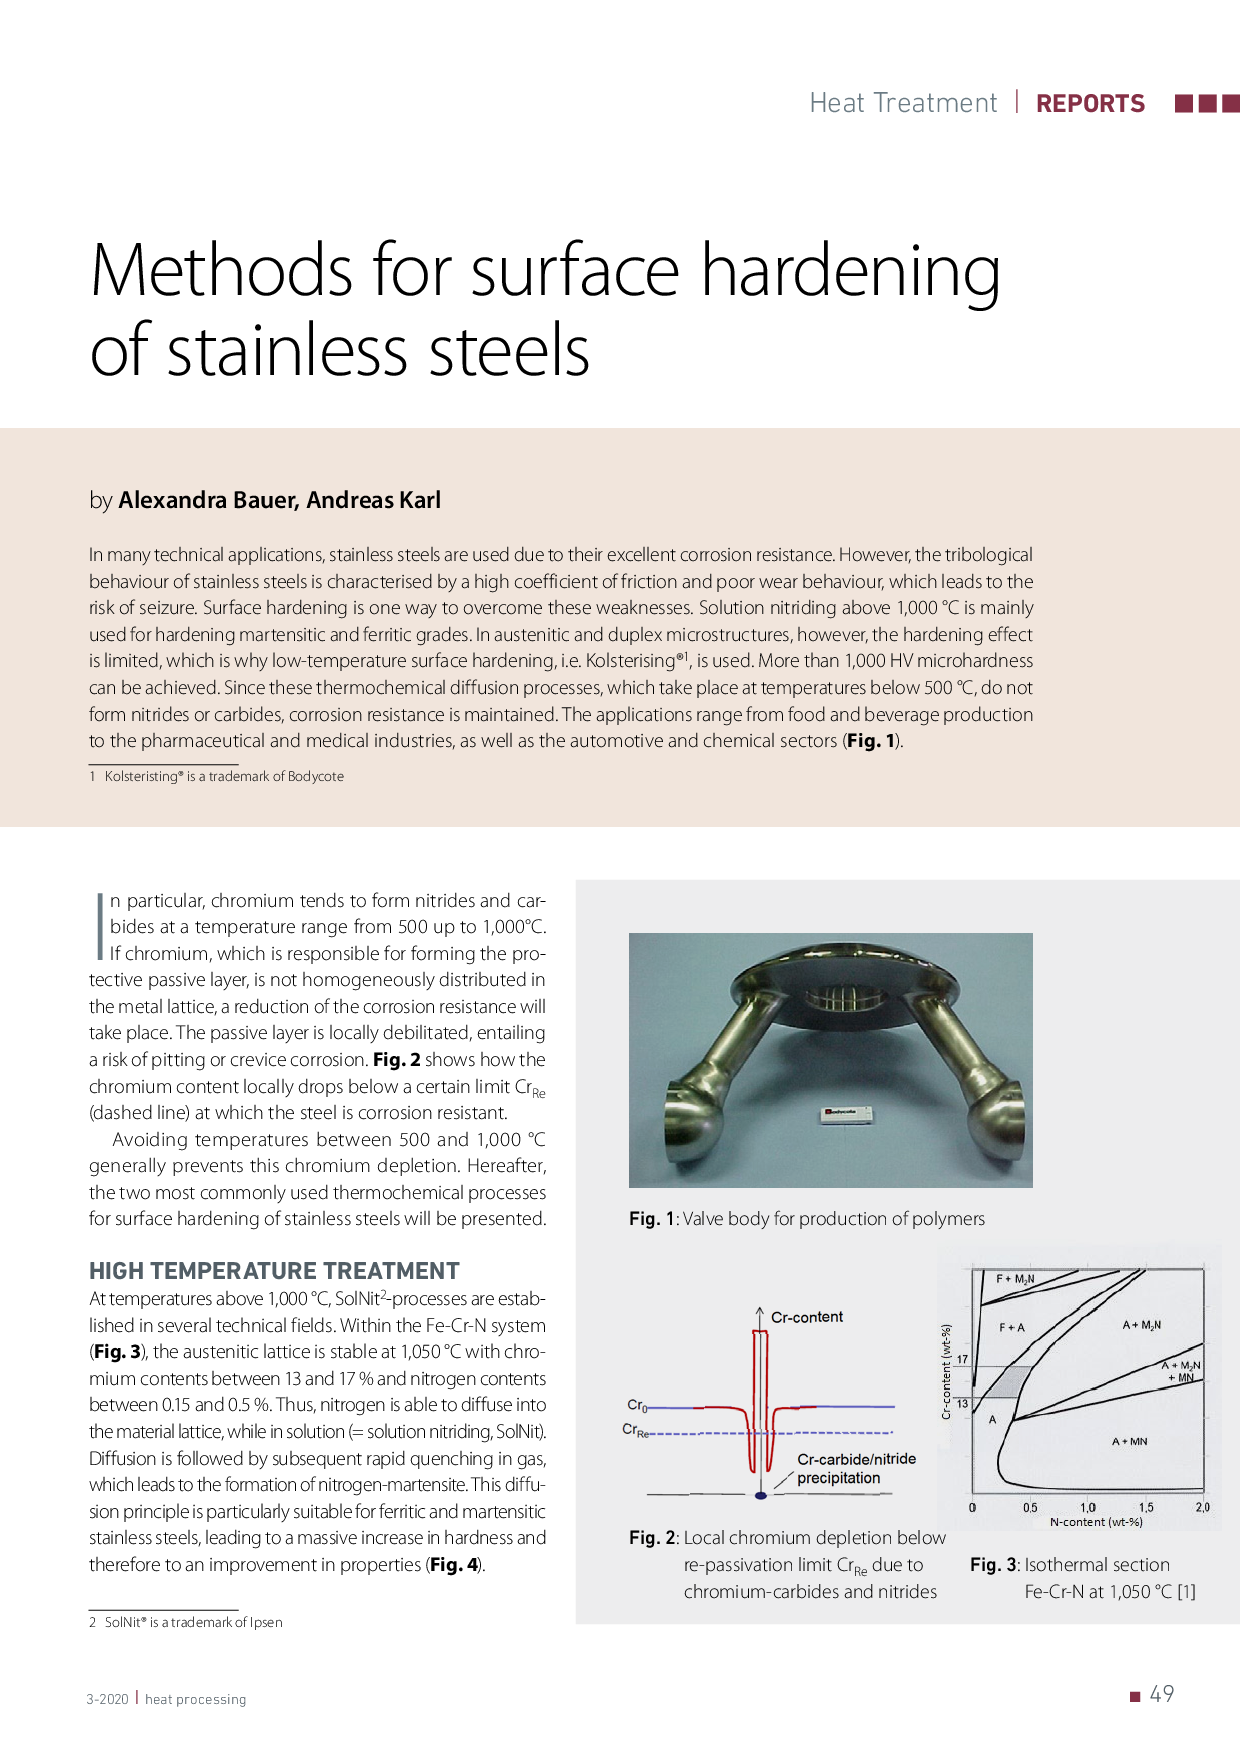 Methods for surface hardening of stainless steels